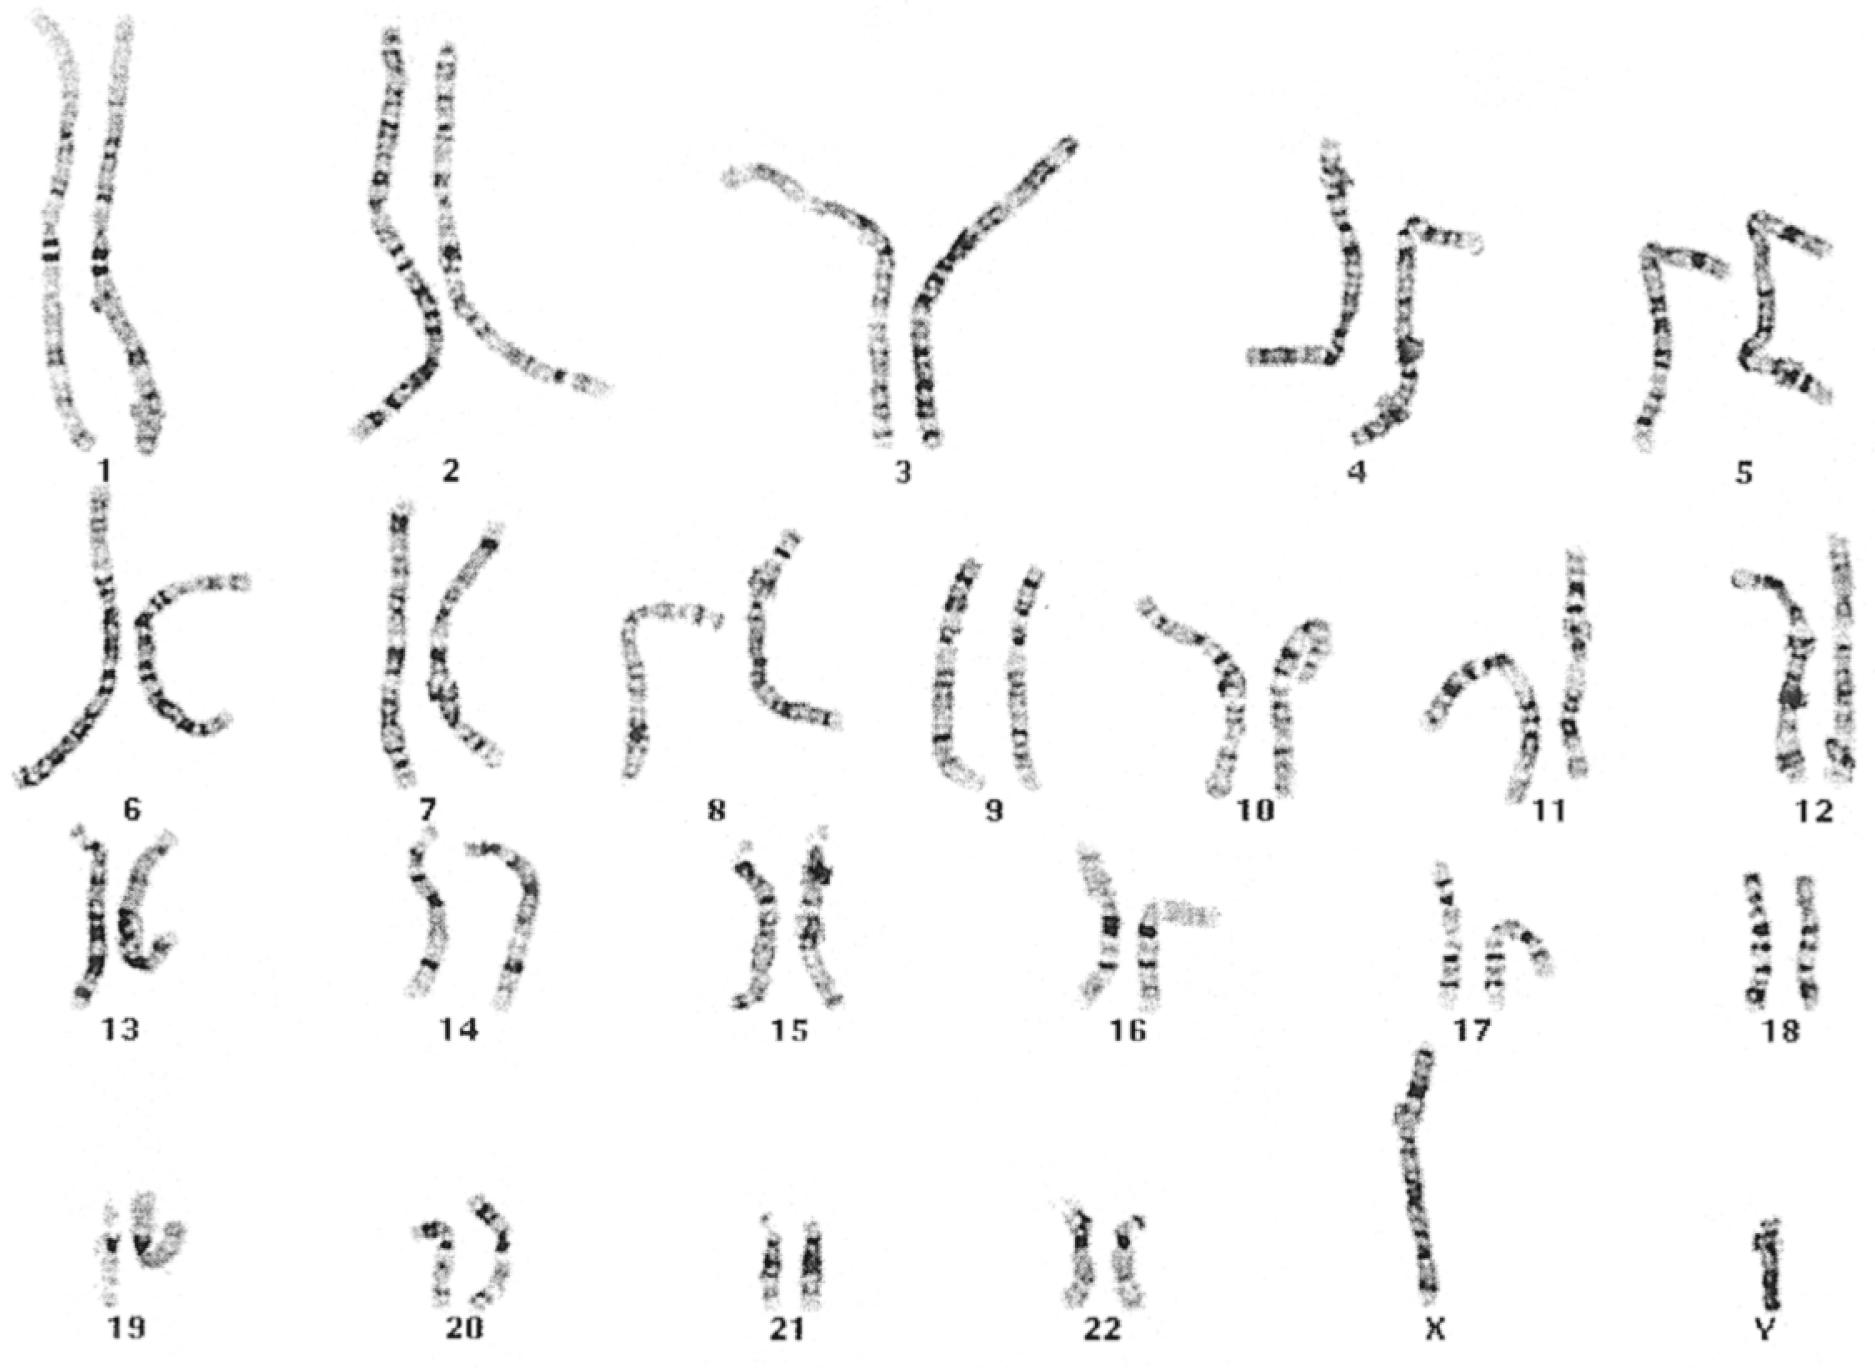 Fig. 1.4, G-banded male karyotype. A female would have two X chromosomes and no Y chromosome. The horizontal banding produced by the Giemsa staining technique allows for precise identification of homologous chromosomes.